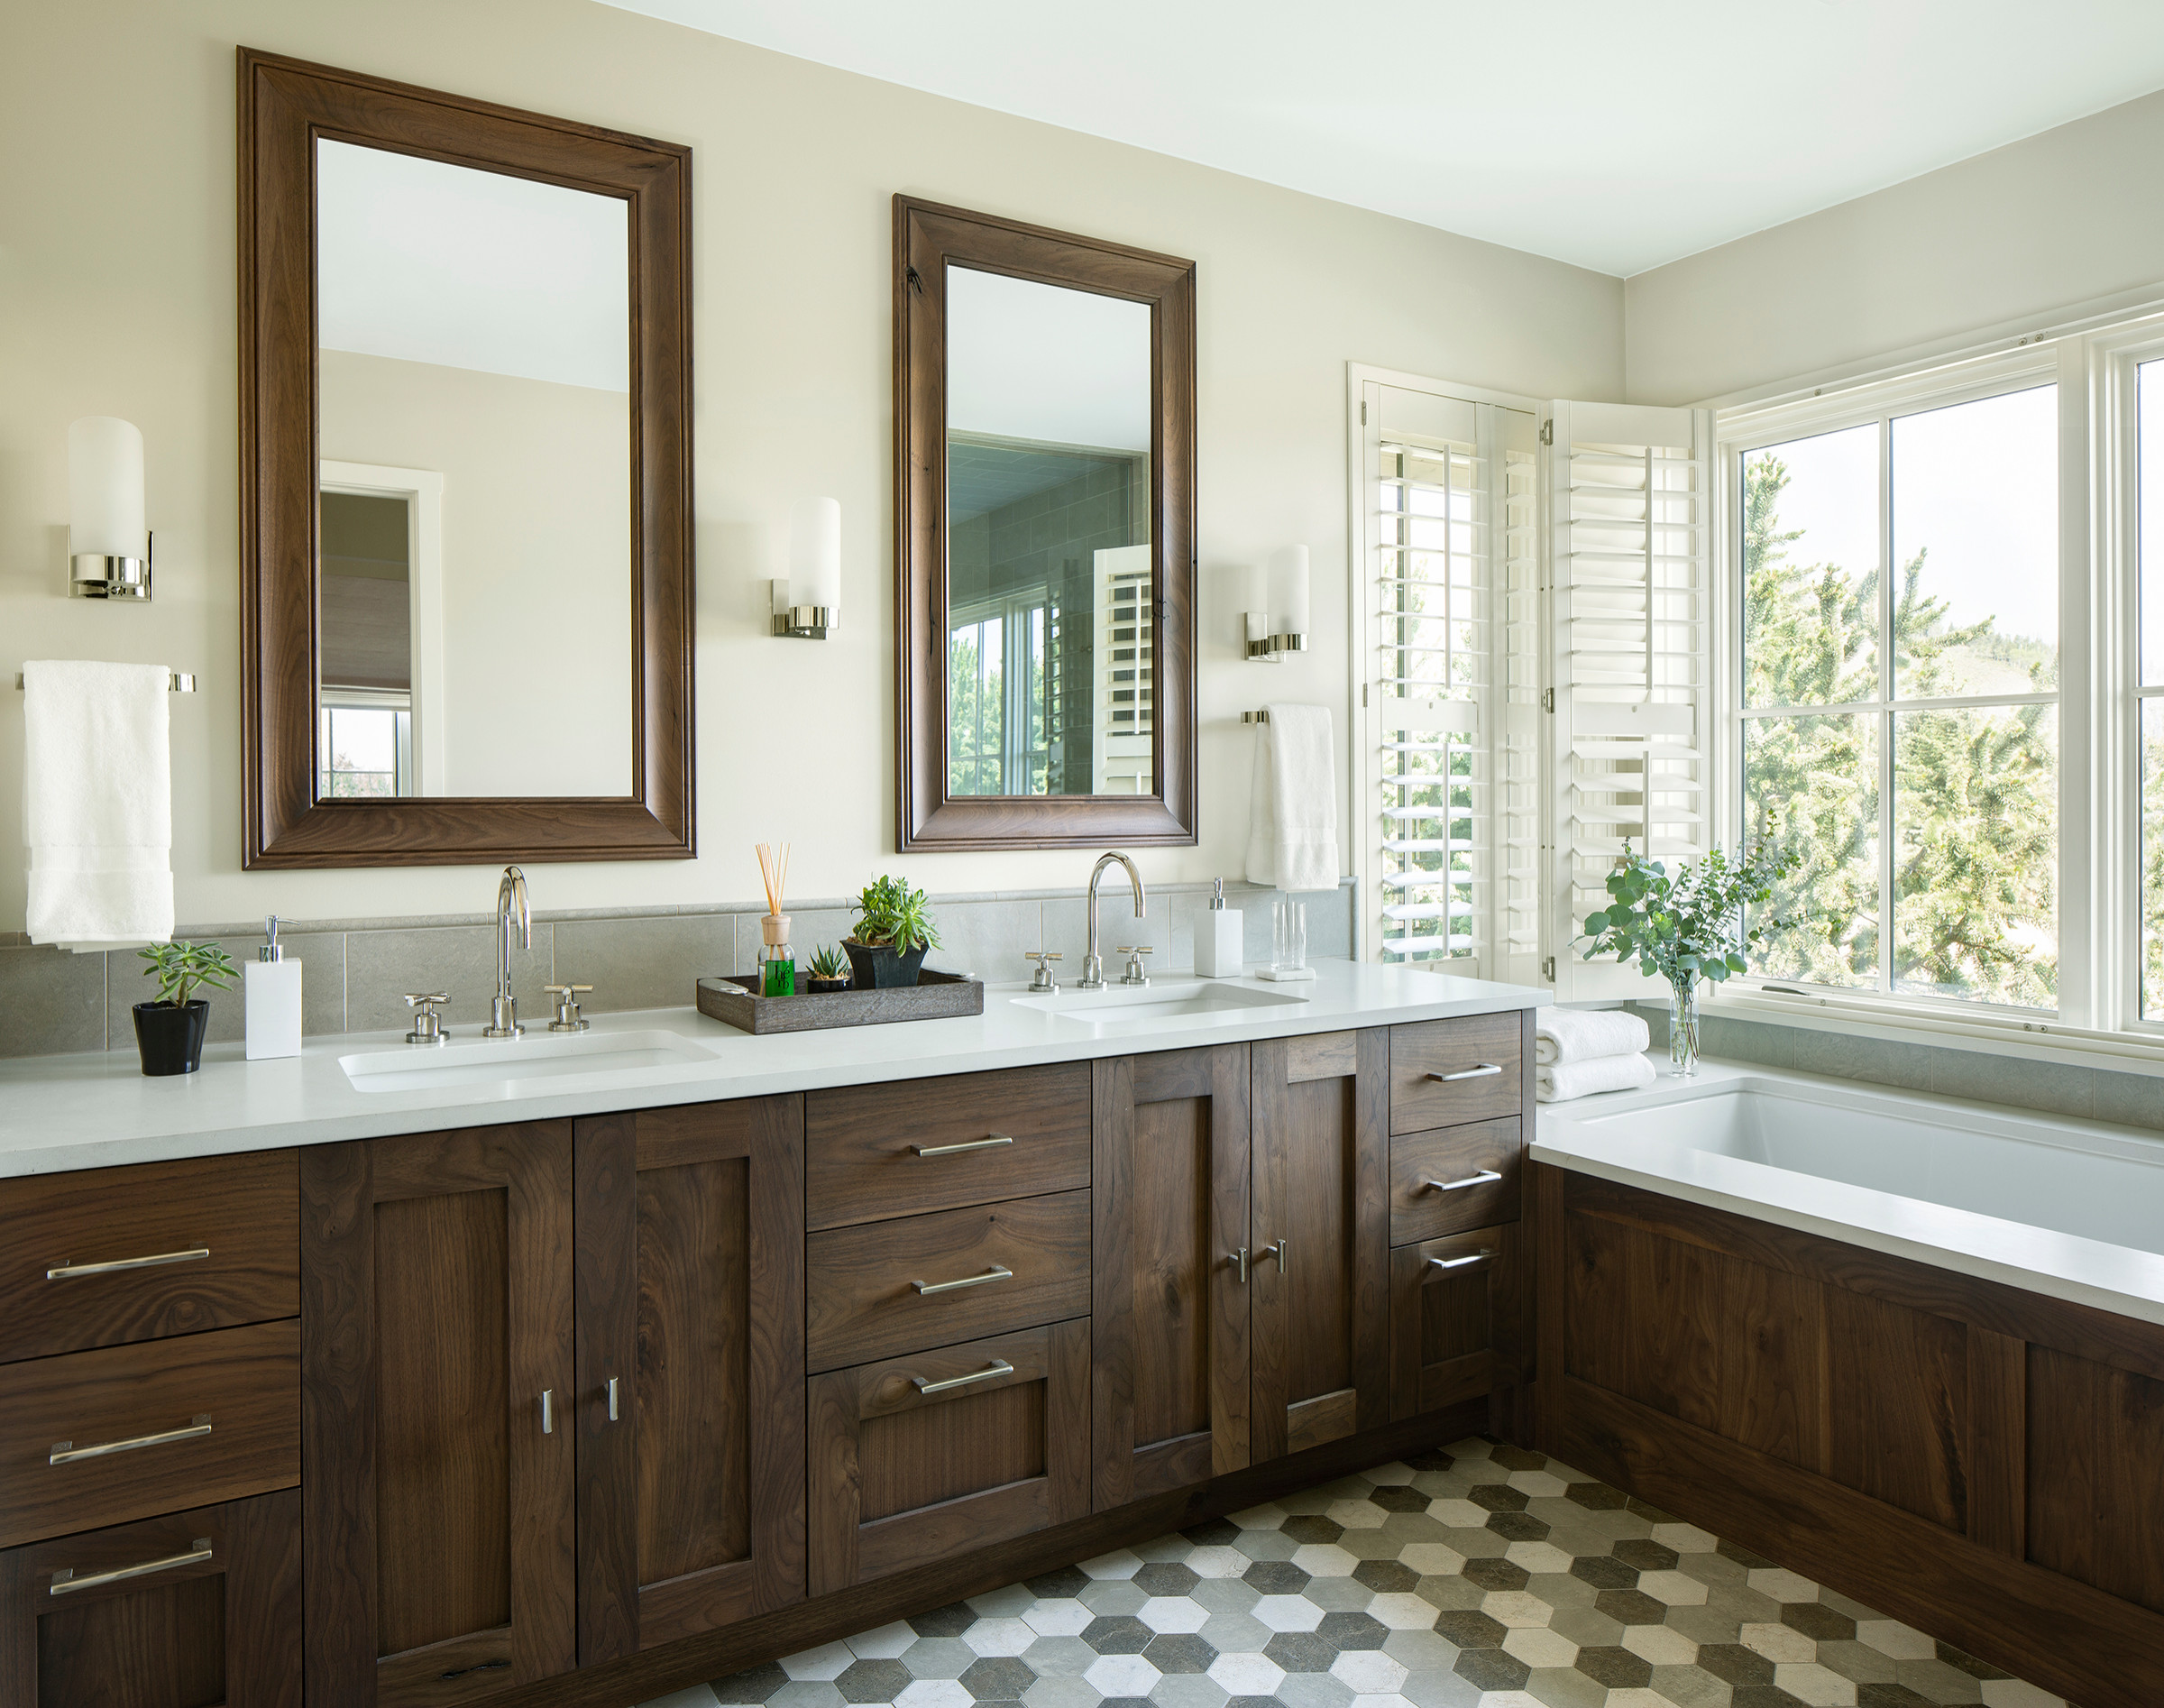 75 Beautiful Bathroom With Brown Cabinets And White Countertops